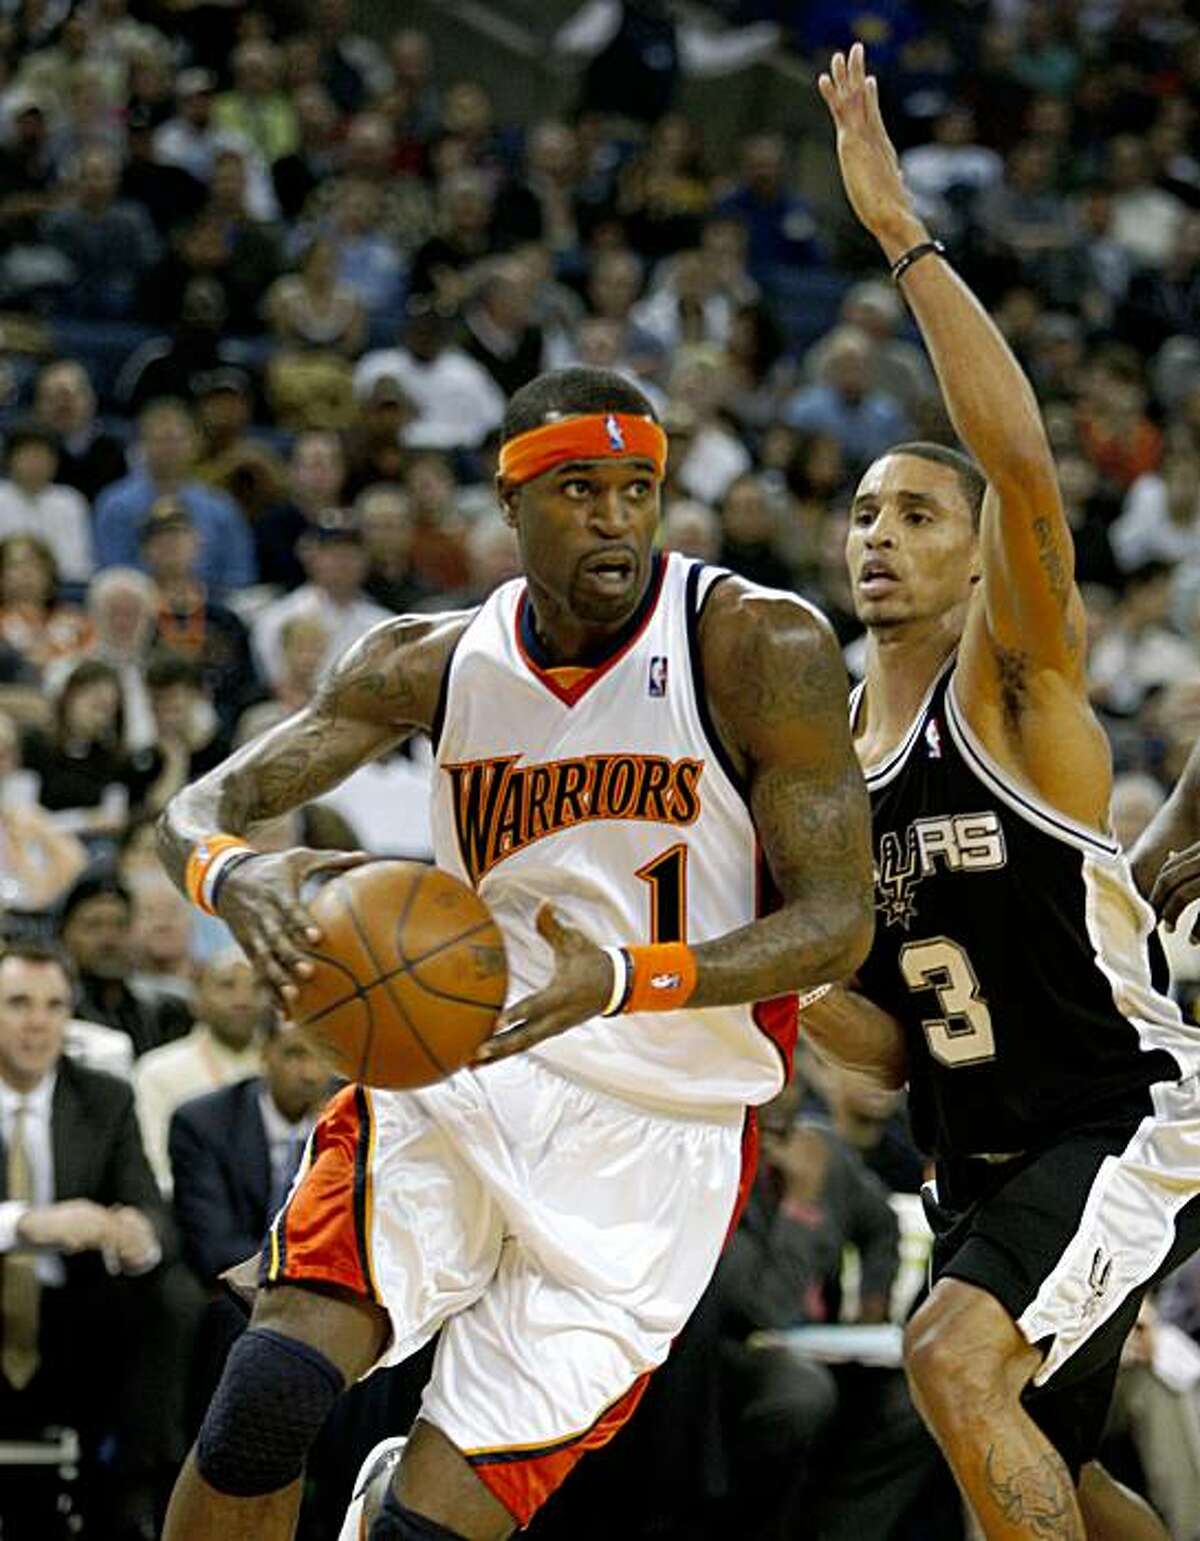 Golden State Warriors Stephen Jackson (1) drives to the basket against San Antonio Spurs George Hill (3) during a NBA game at Oracle Arena in Oakland, Calif., on Monday, February 2, 2009.